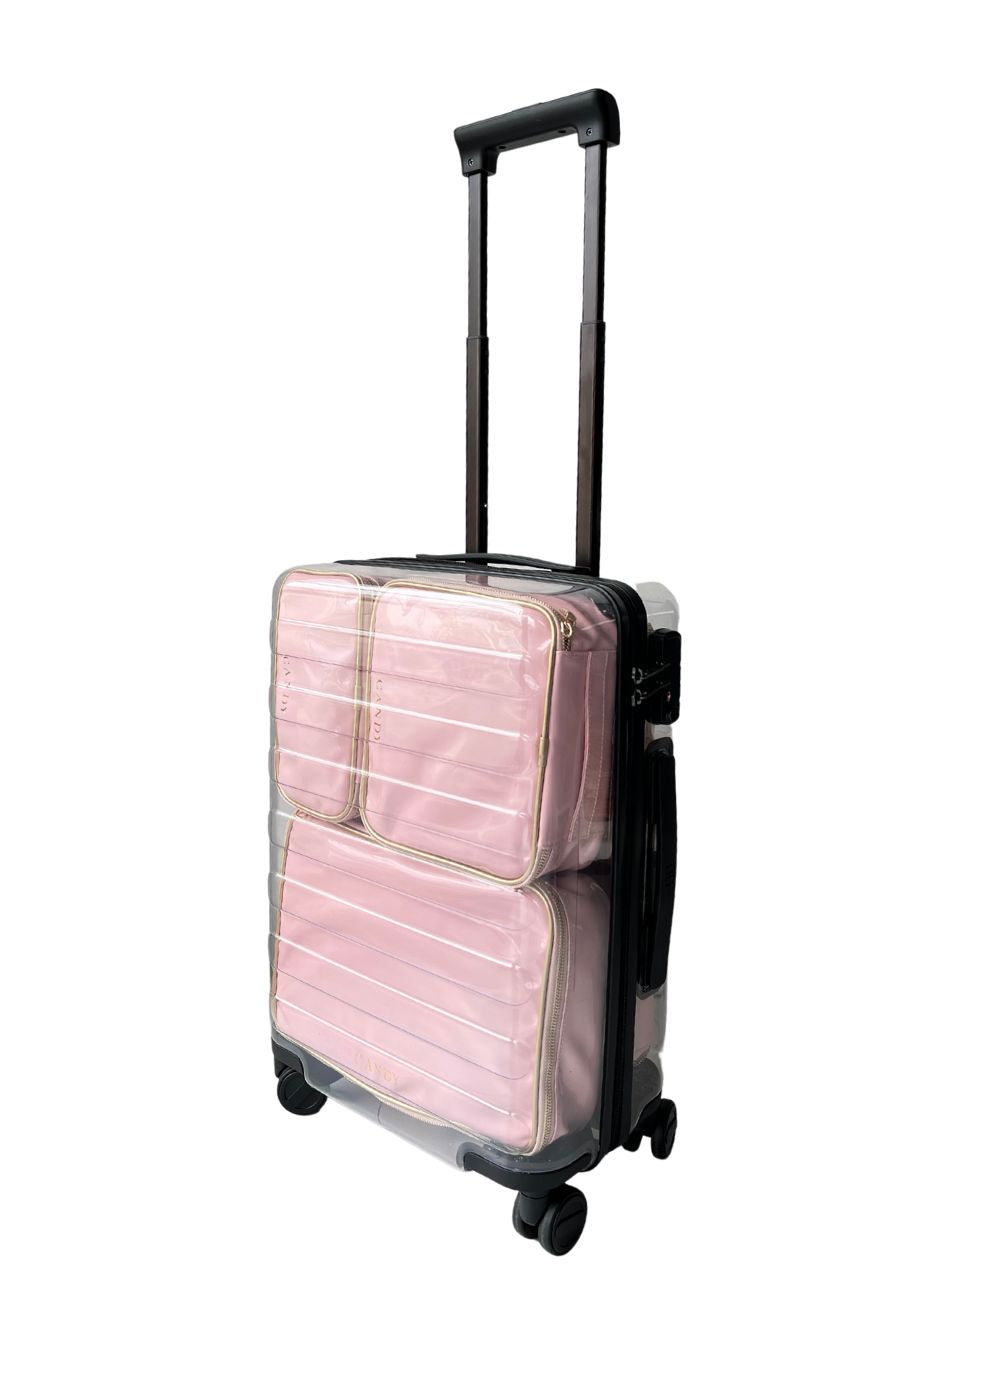 Transparent carry-on luggage [PRE-ORDER]